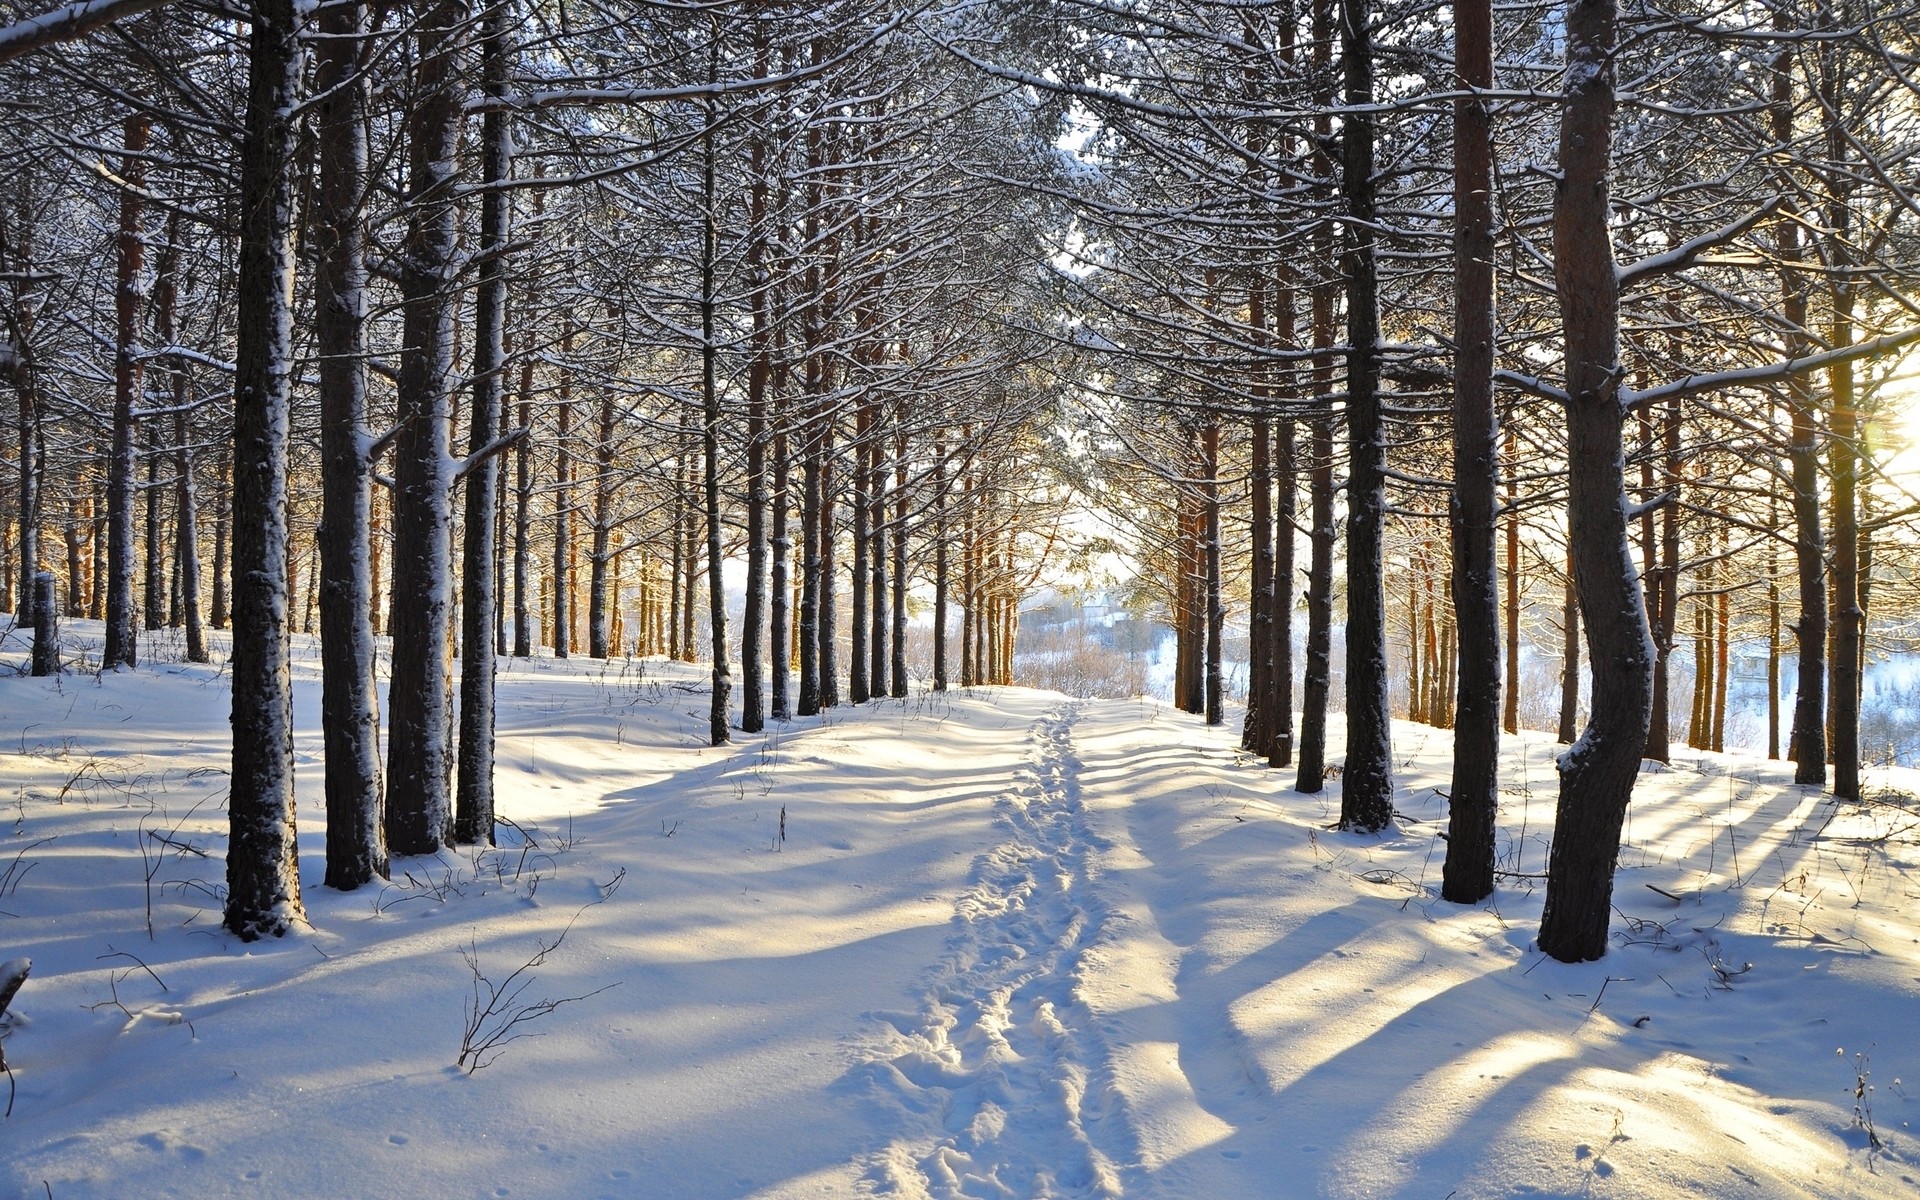 Snowy Forest Steps Vale Sunny wallpapers and stock photos